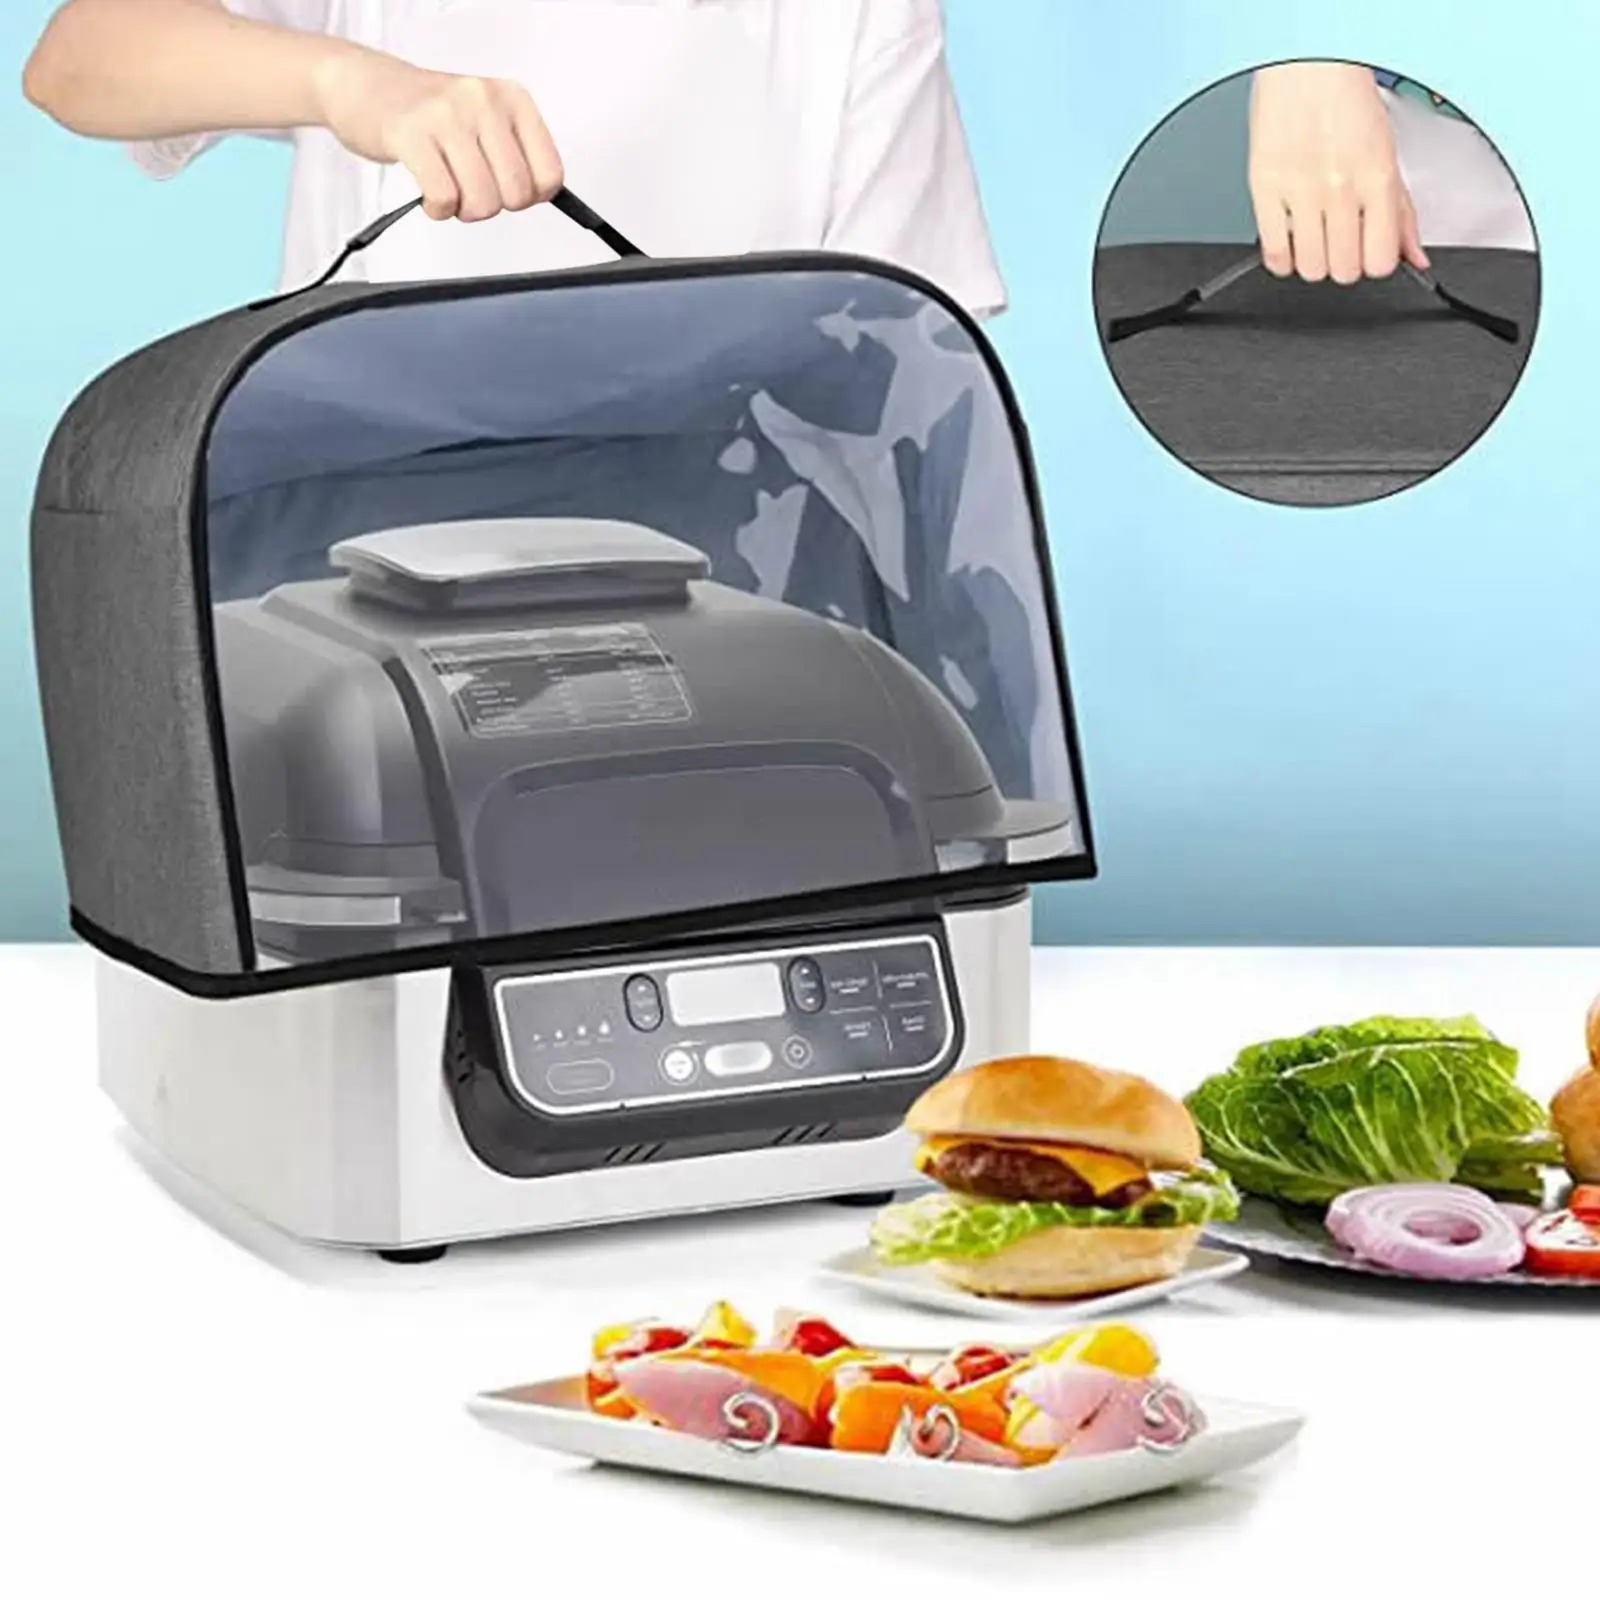 Household Grill Dust Cover Fingerprint Protection Clear Front Panel Dust Proof PVC Oxford Cloth Bread Dust Cover for Bread